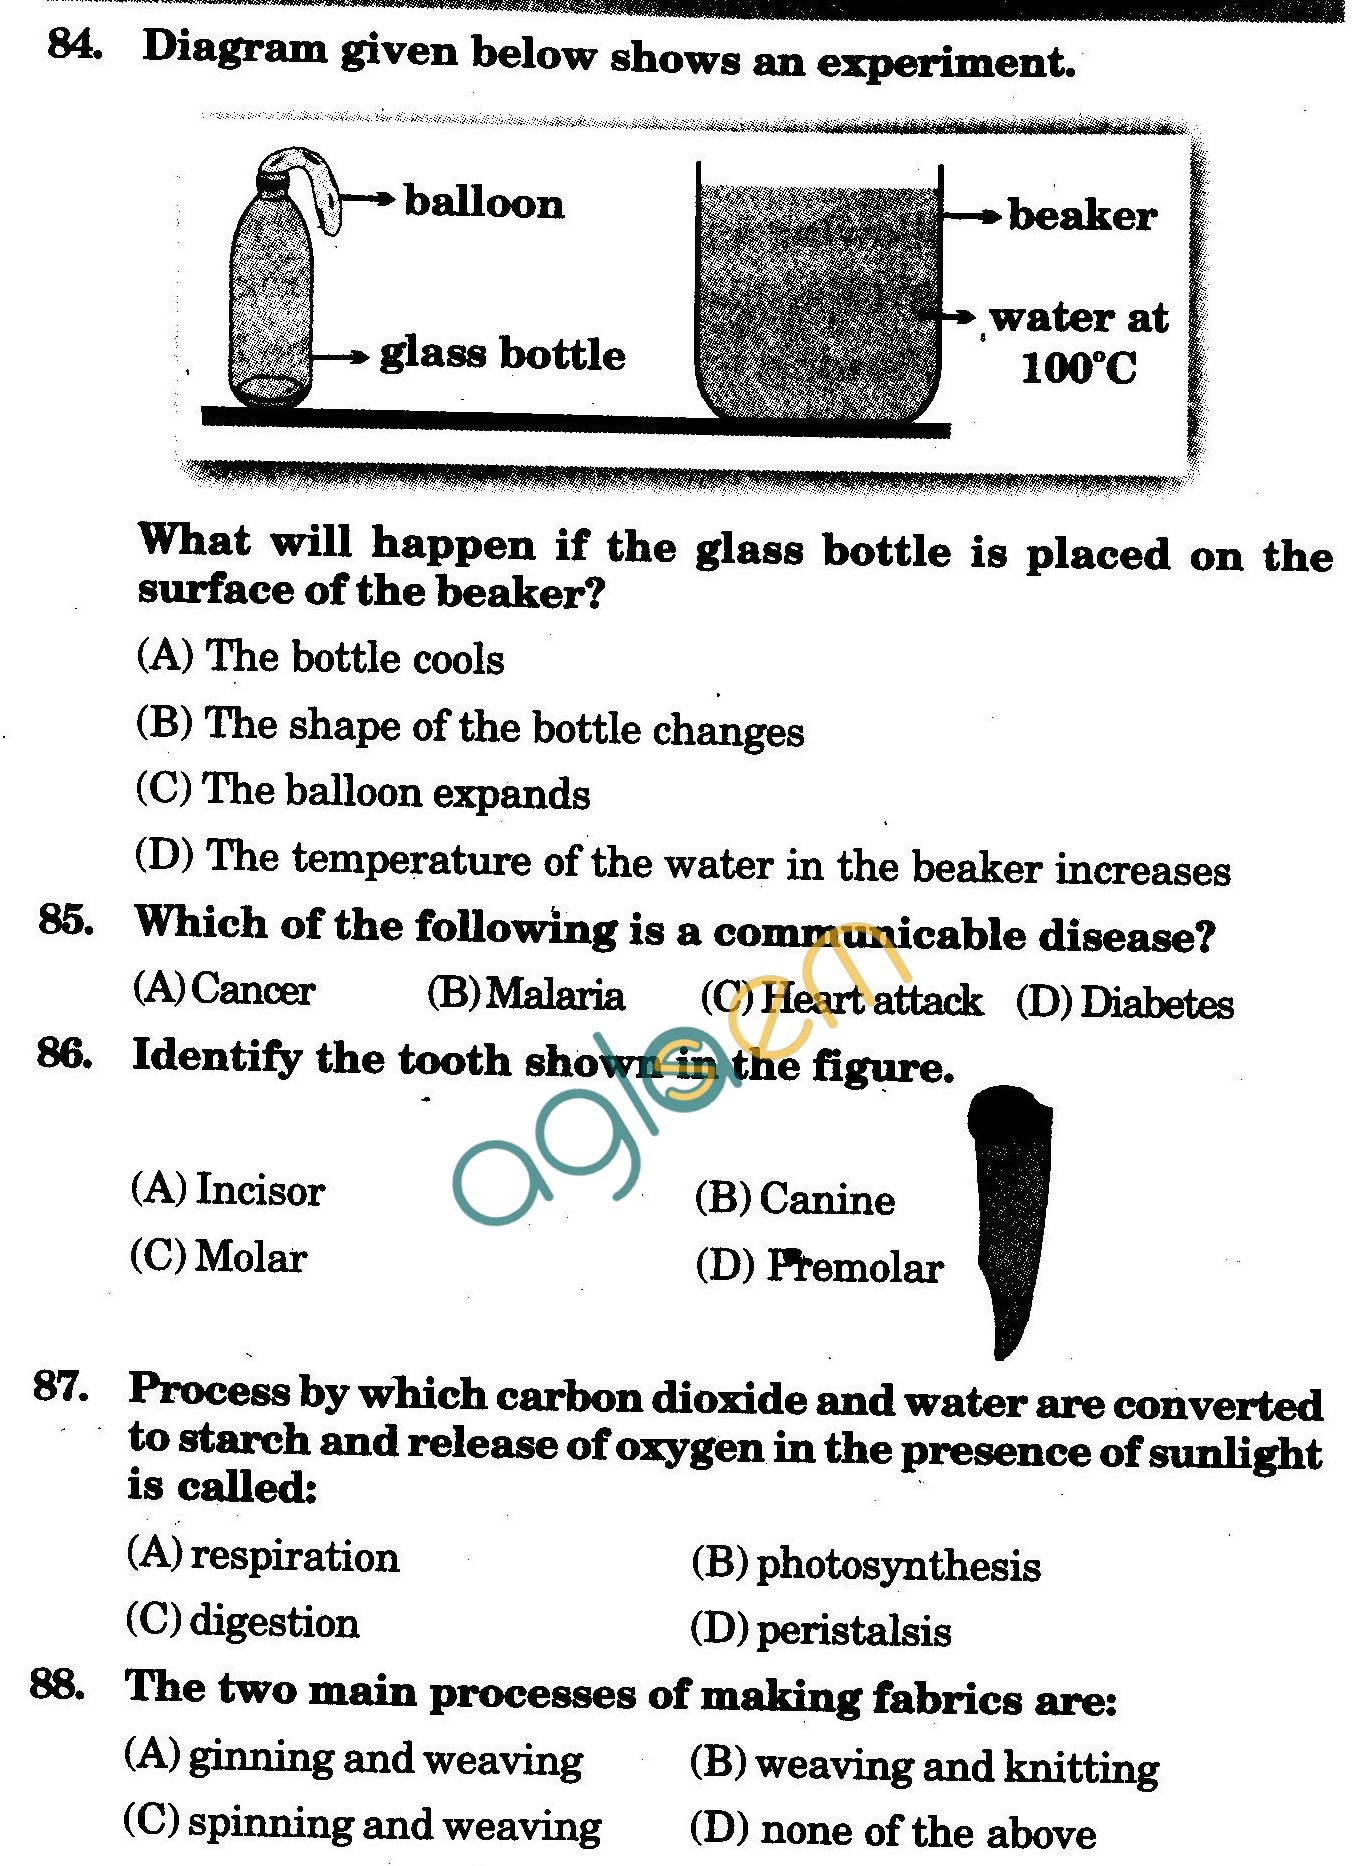 NSTSE 2009 Class IV Question Paper with Answers - Science